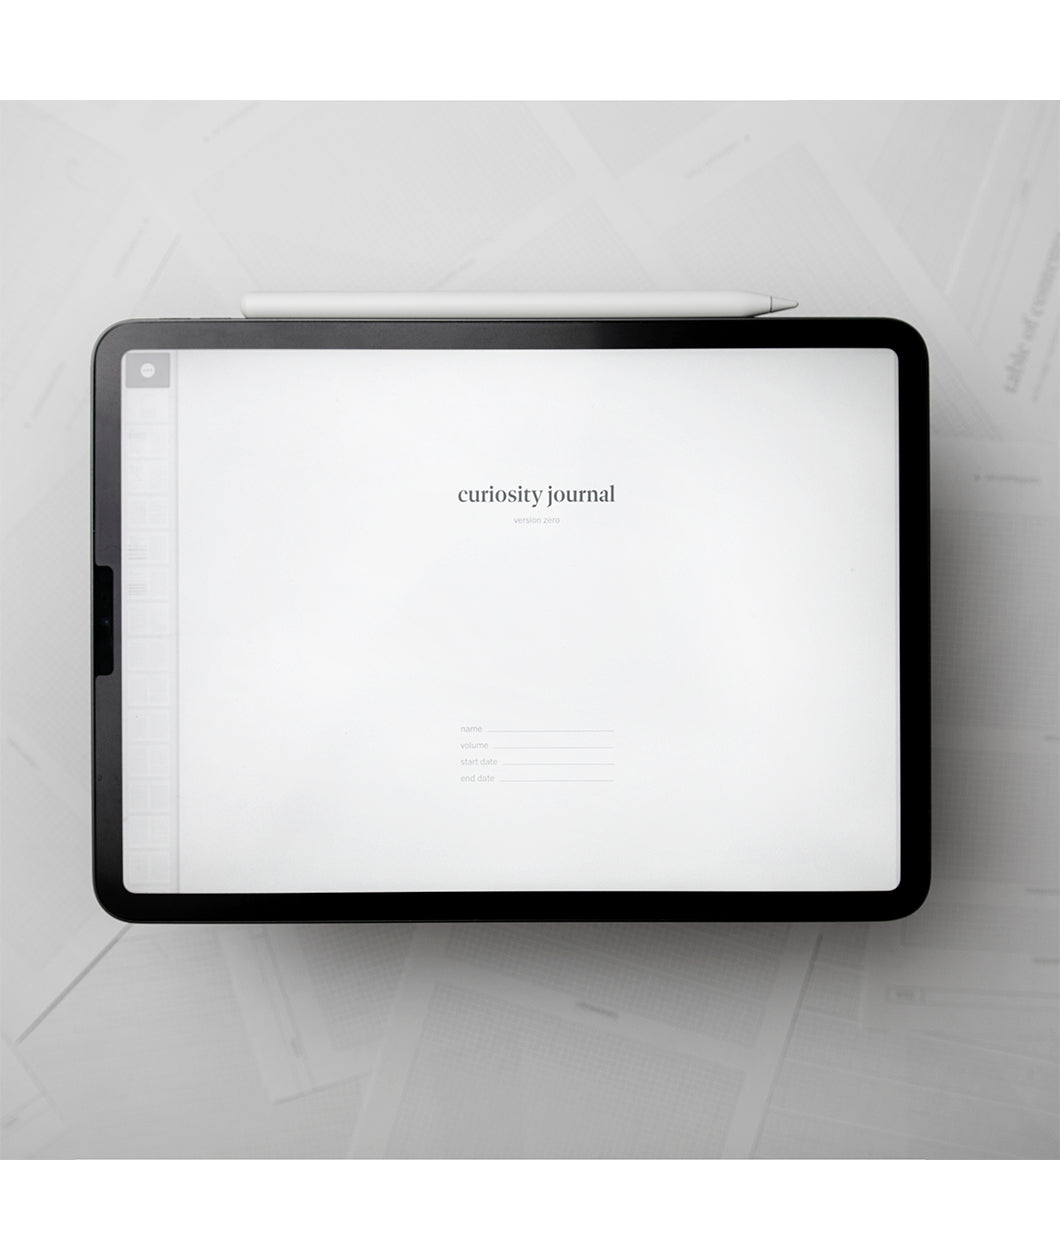 A tablet with a white background and small text in the center that says "Curiosity Journal". From Answer in Progress.